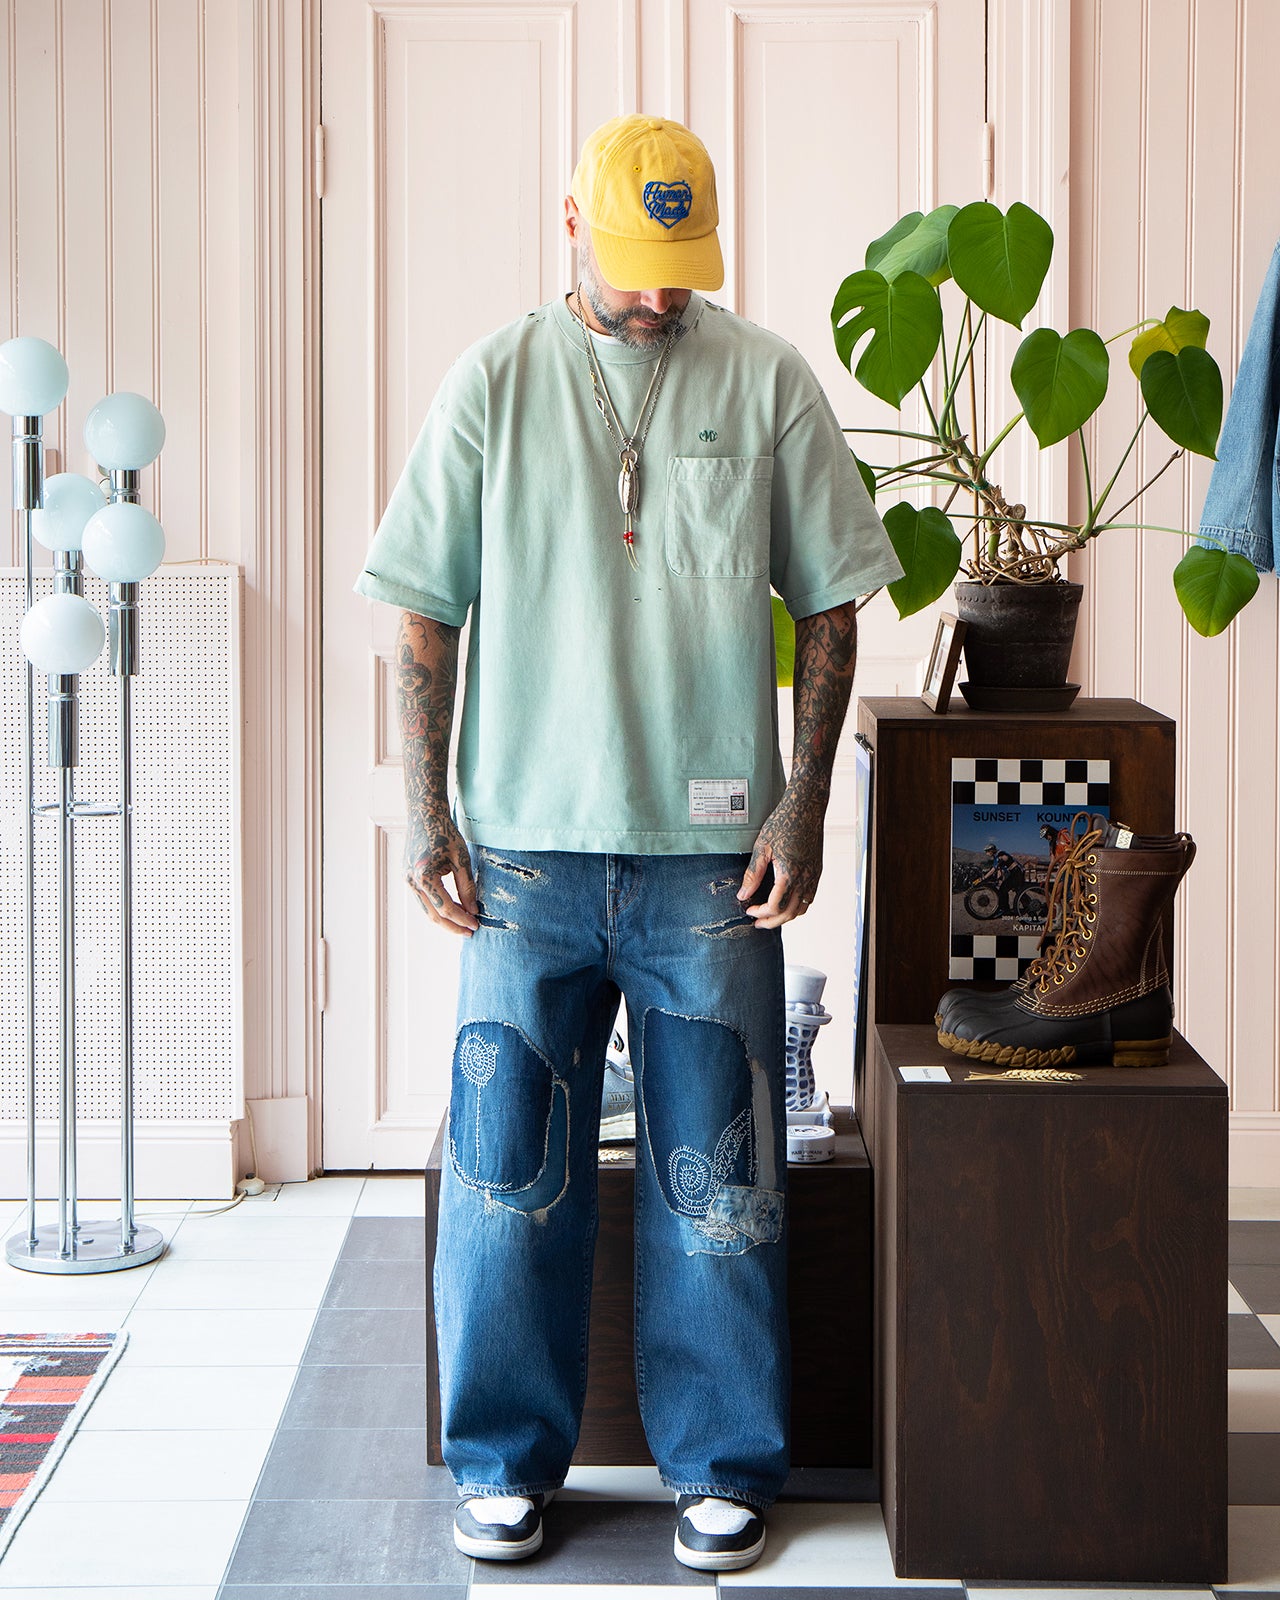 Human Made 6 Panel Cap #1, Yellow – Pancho And Lefty - Online Store